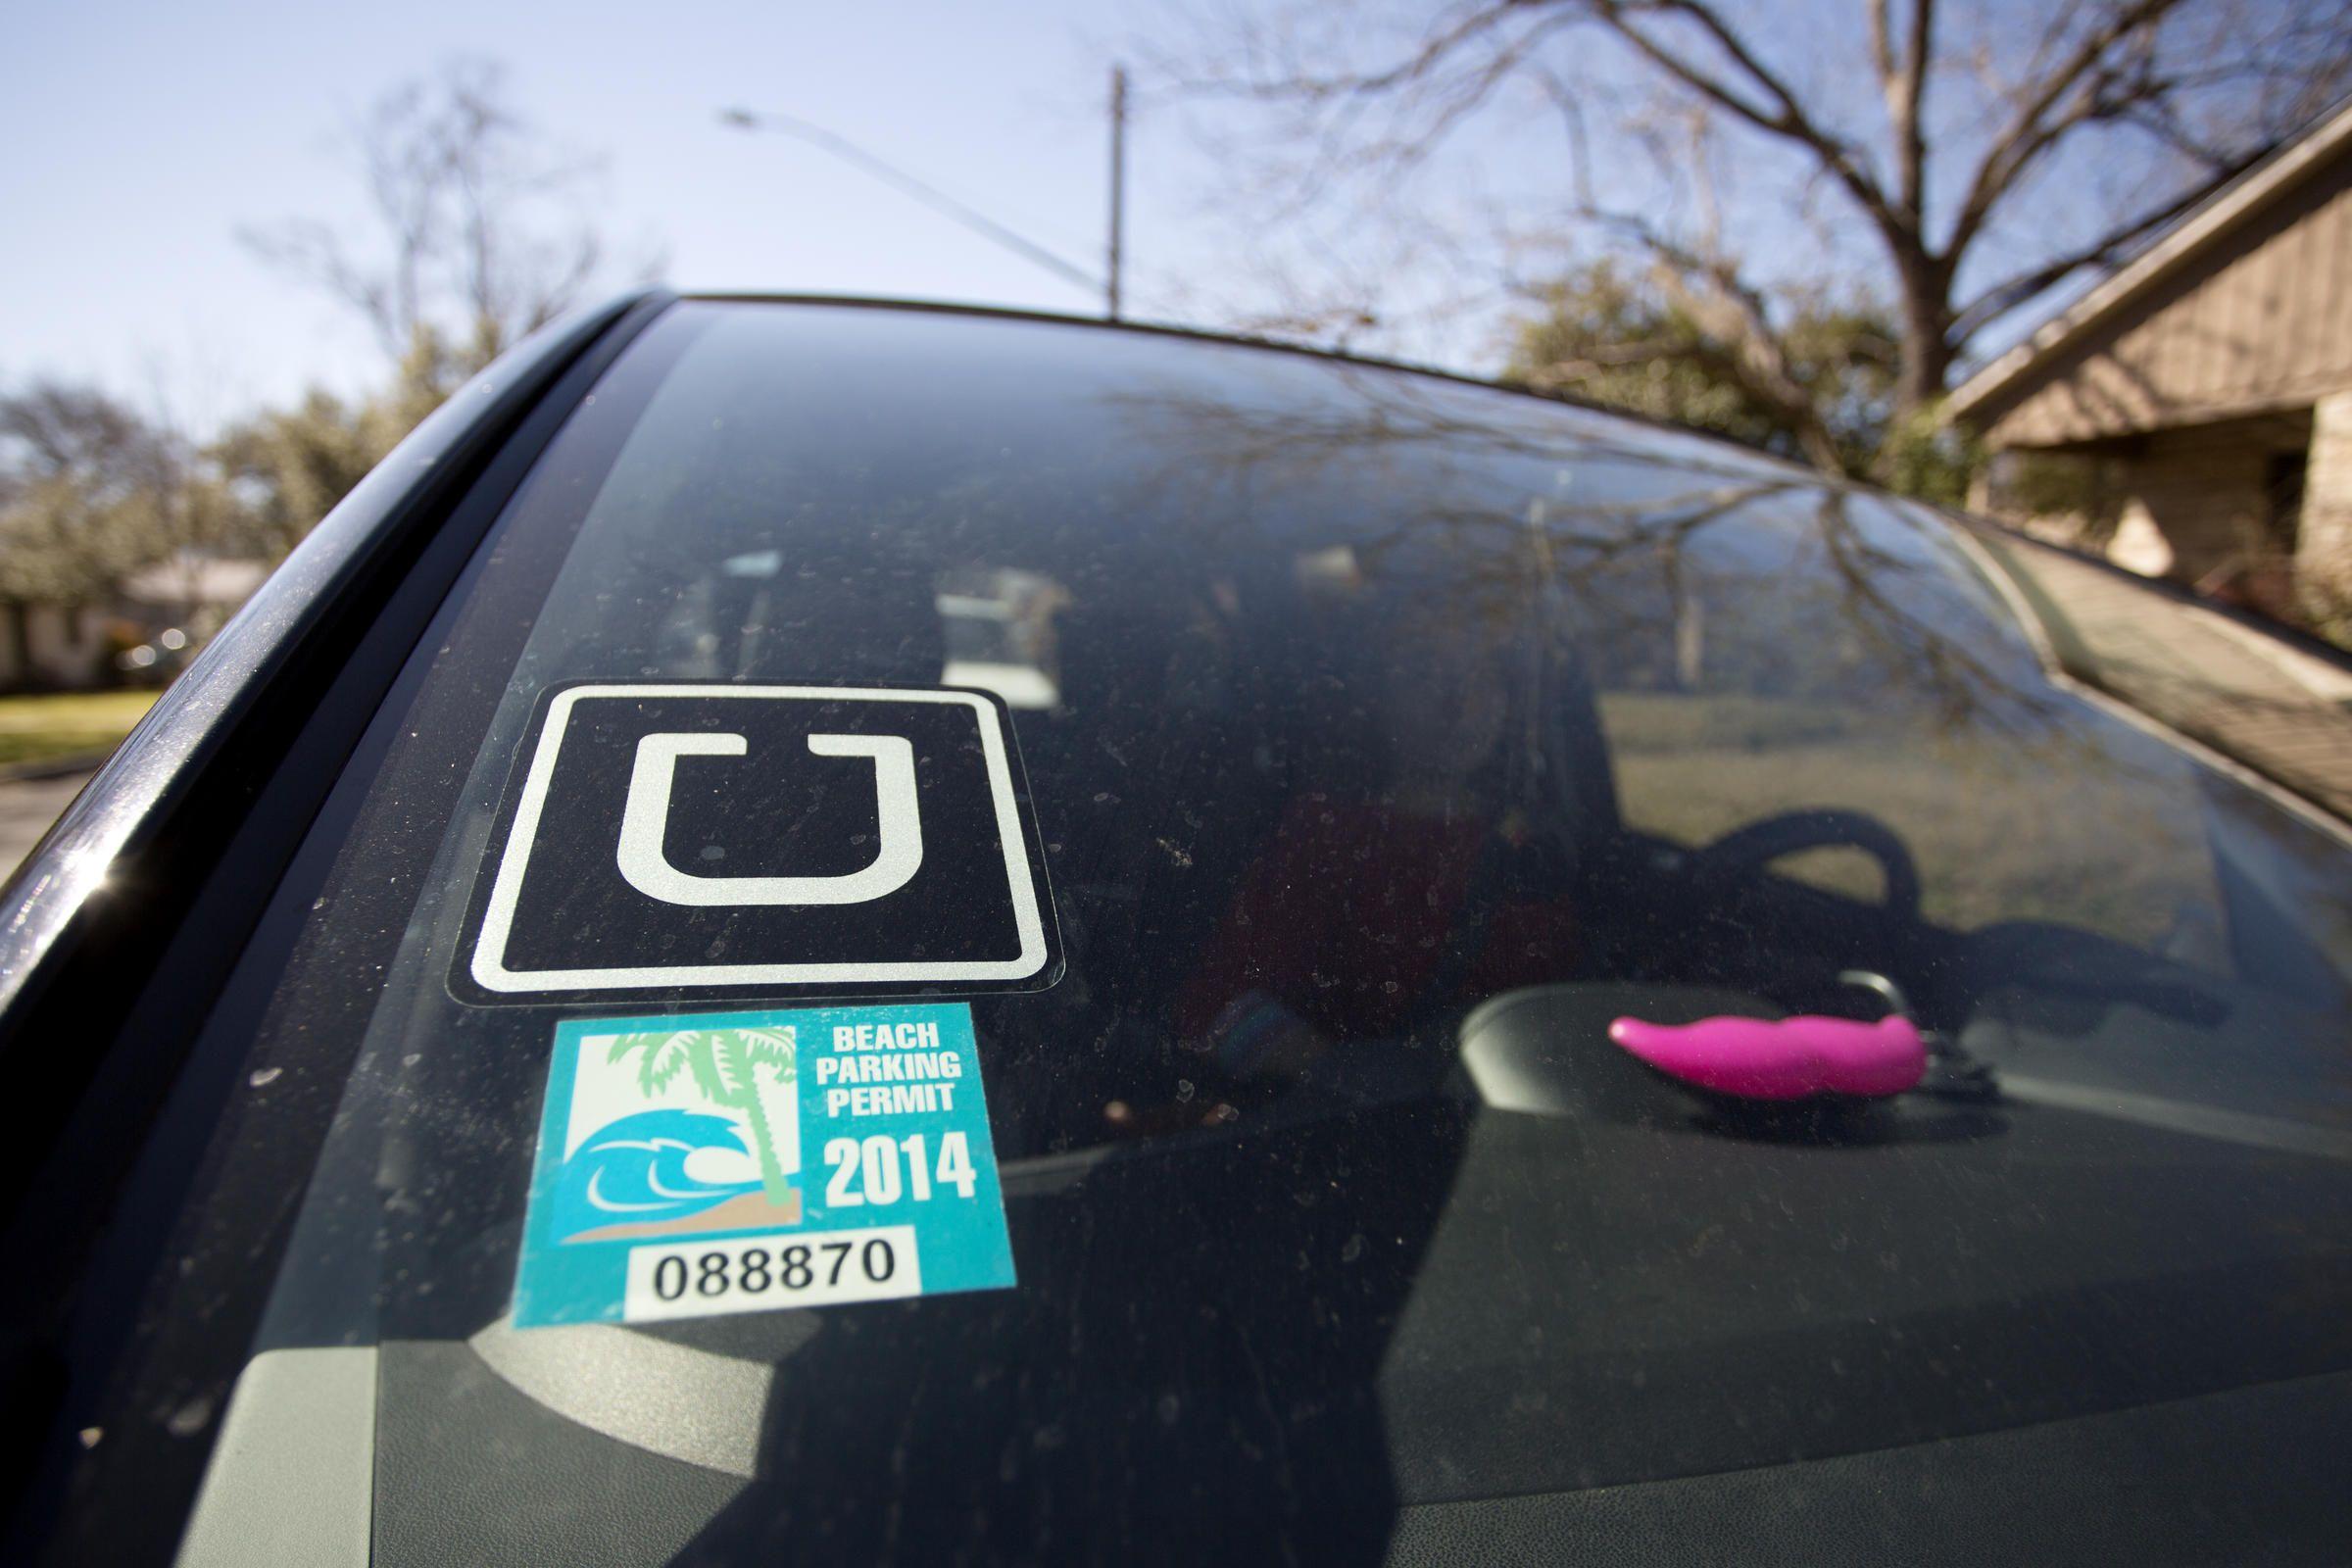 New Printable Uber Lyft Mustache Logo - One Current City Law Goes Unfollowed by Uber and Lyft Drivers | KUT